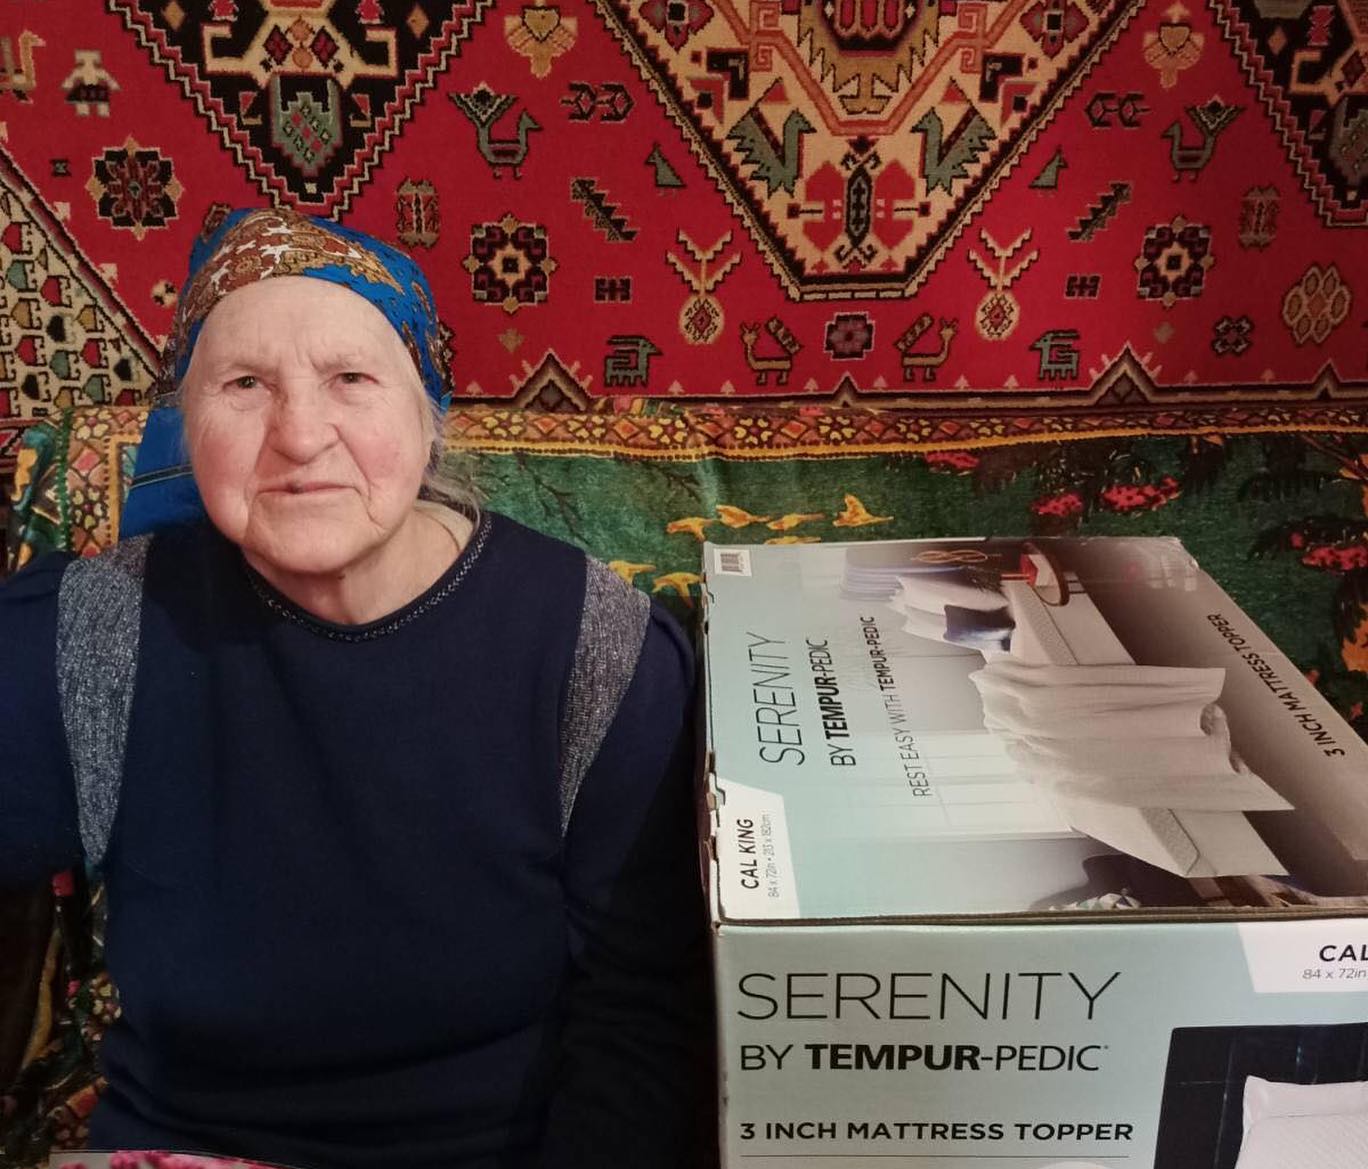 An elderly woman sitting in front of a colorful rug with a tempur-pedic mattress topper box beside her.